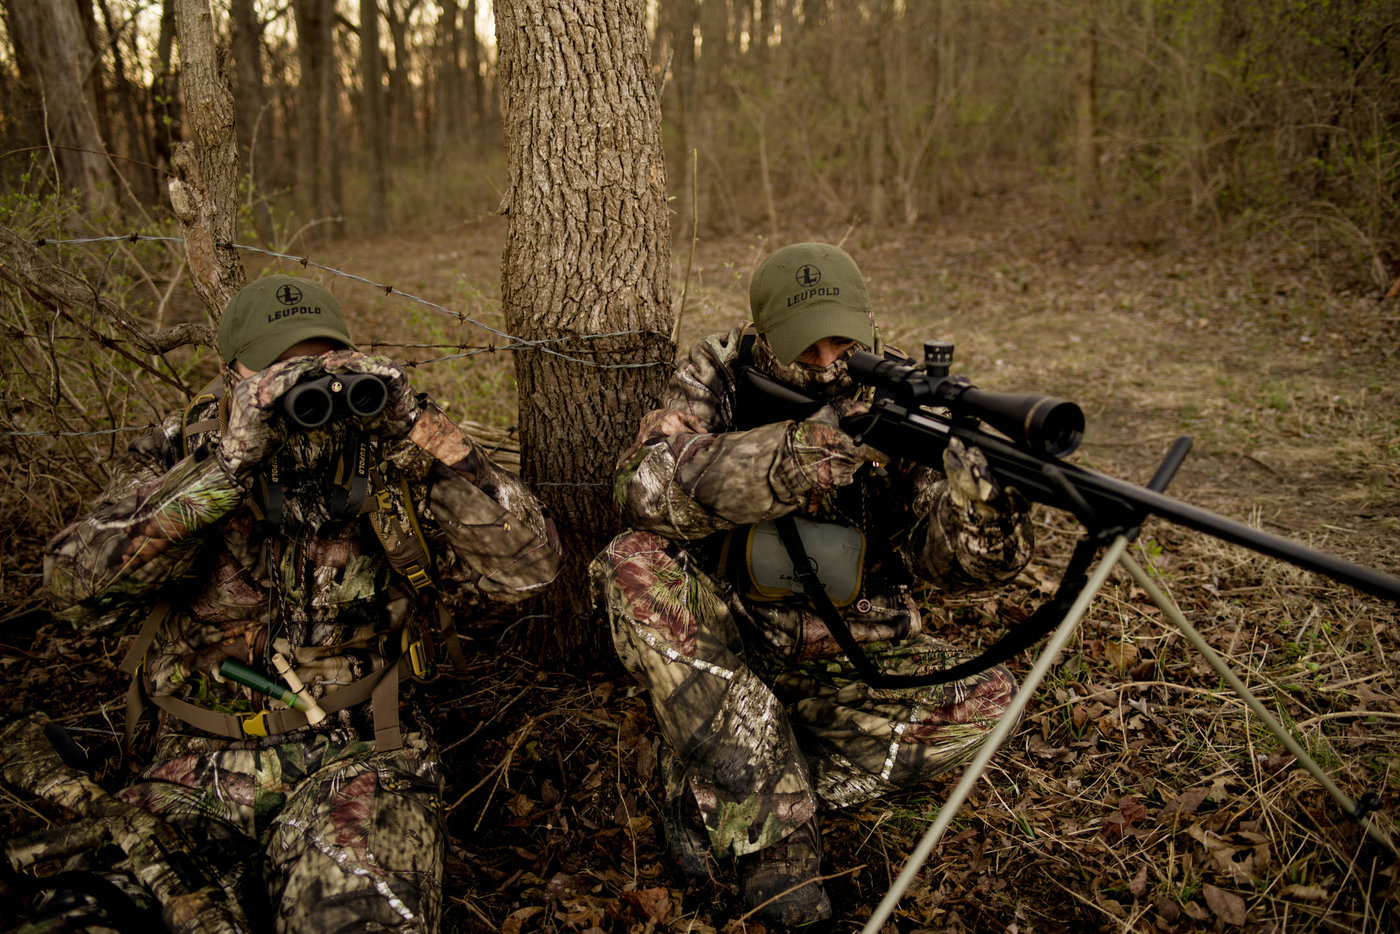 Placing the e-caller in an open area where a predator can find it will make your shot easier.